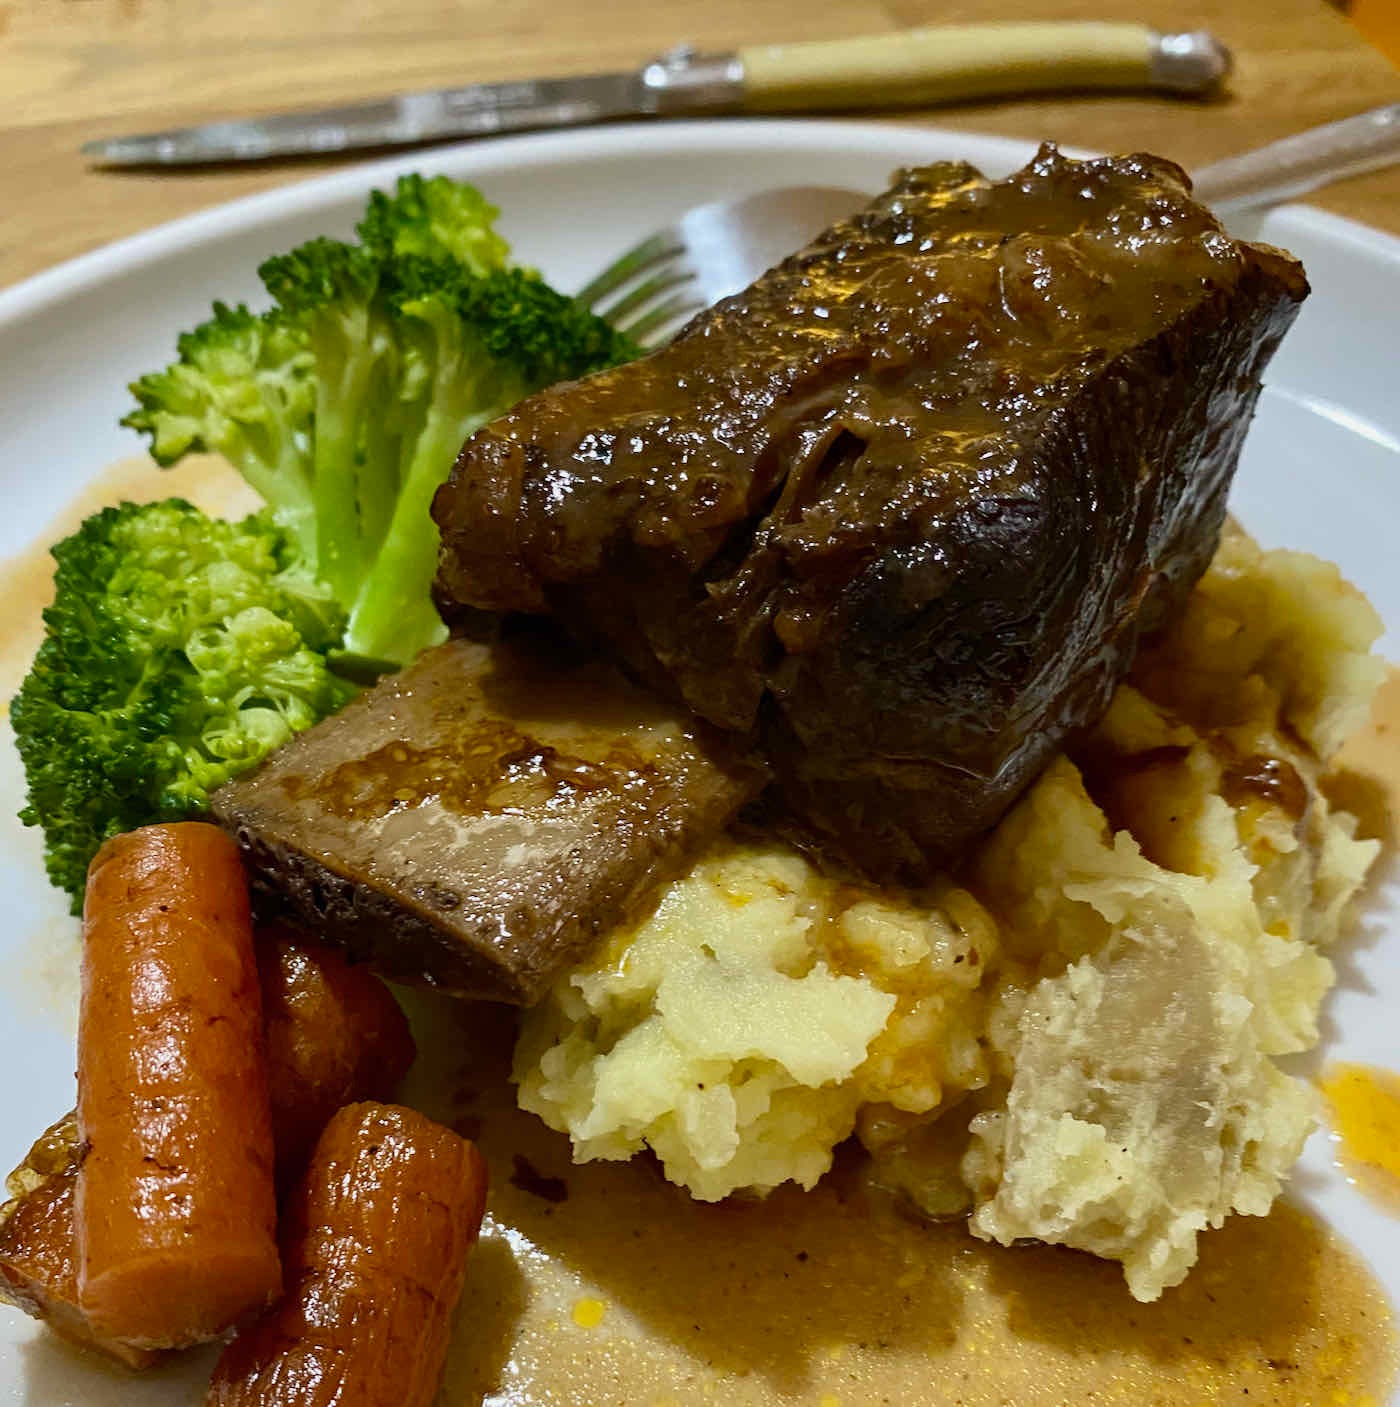 Braised short rib on a bed of mashed potato, with carrots and broccoli